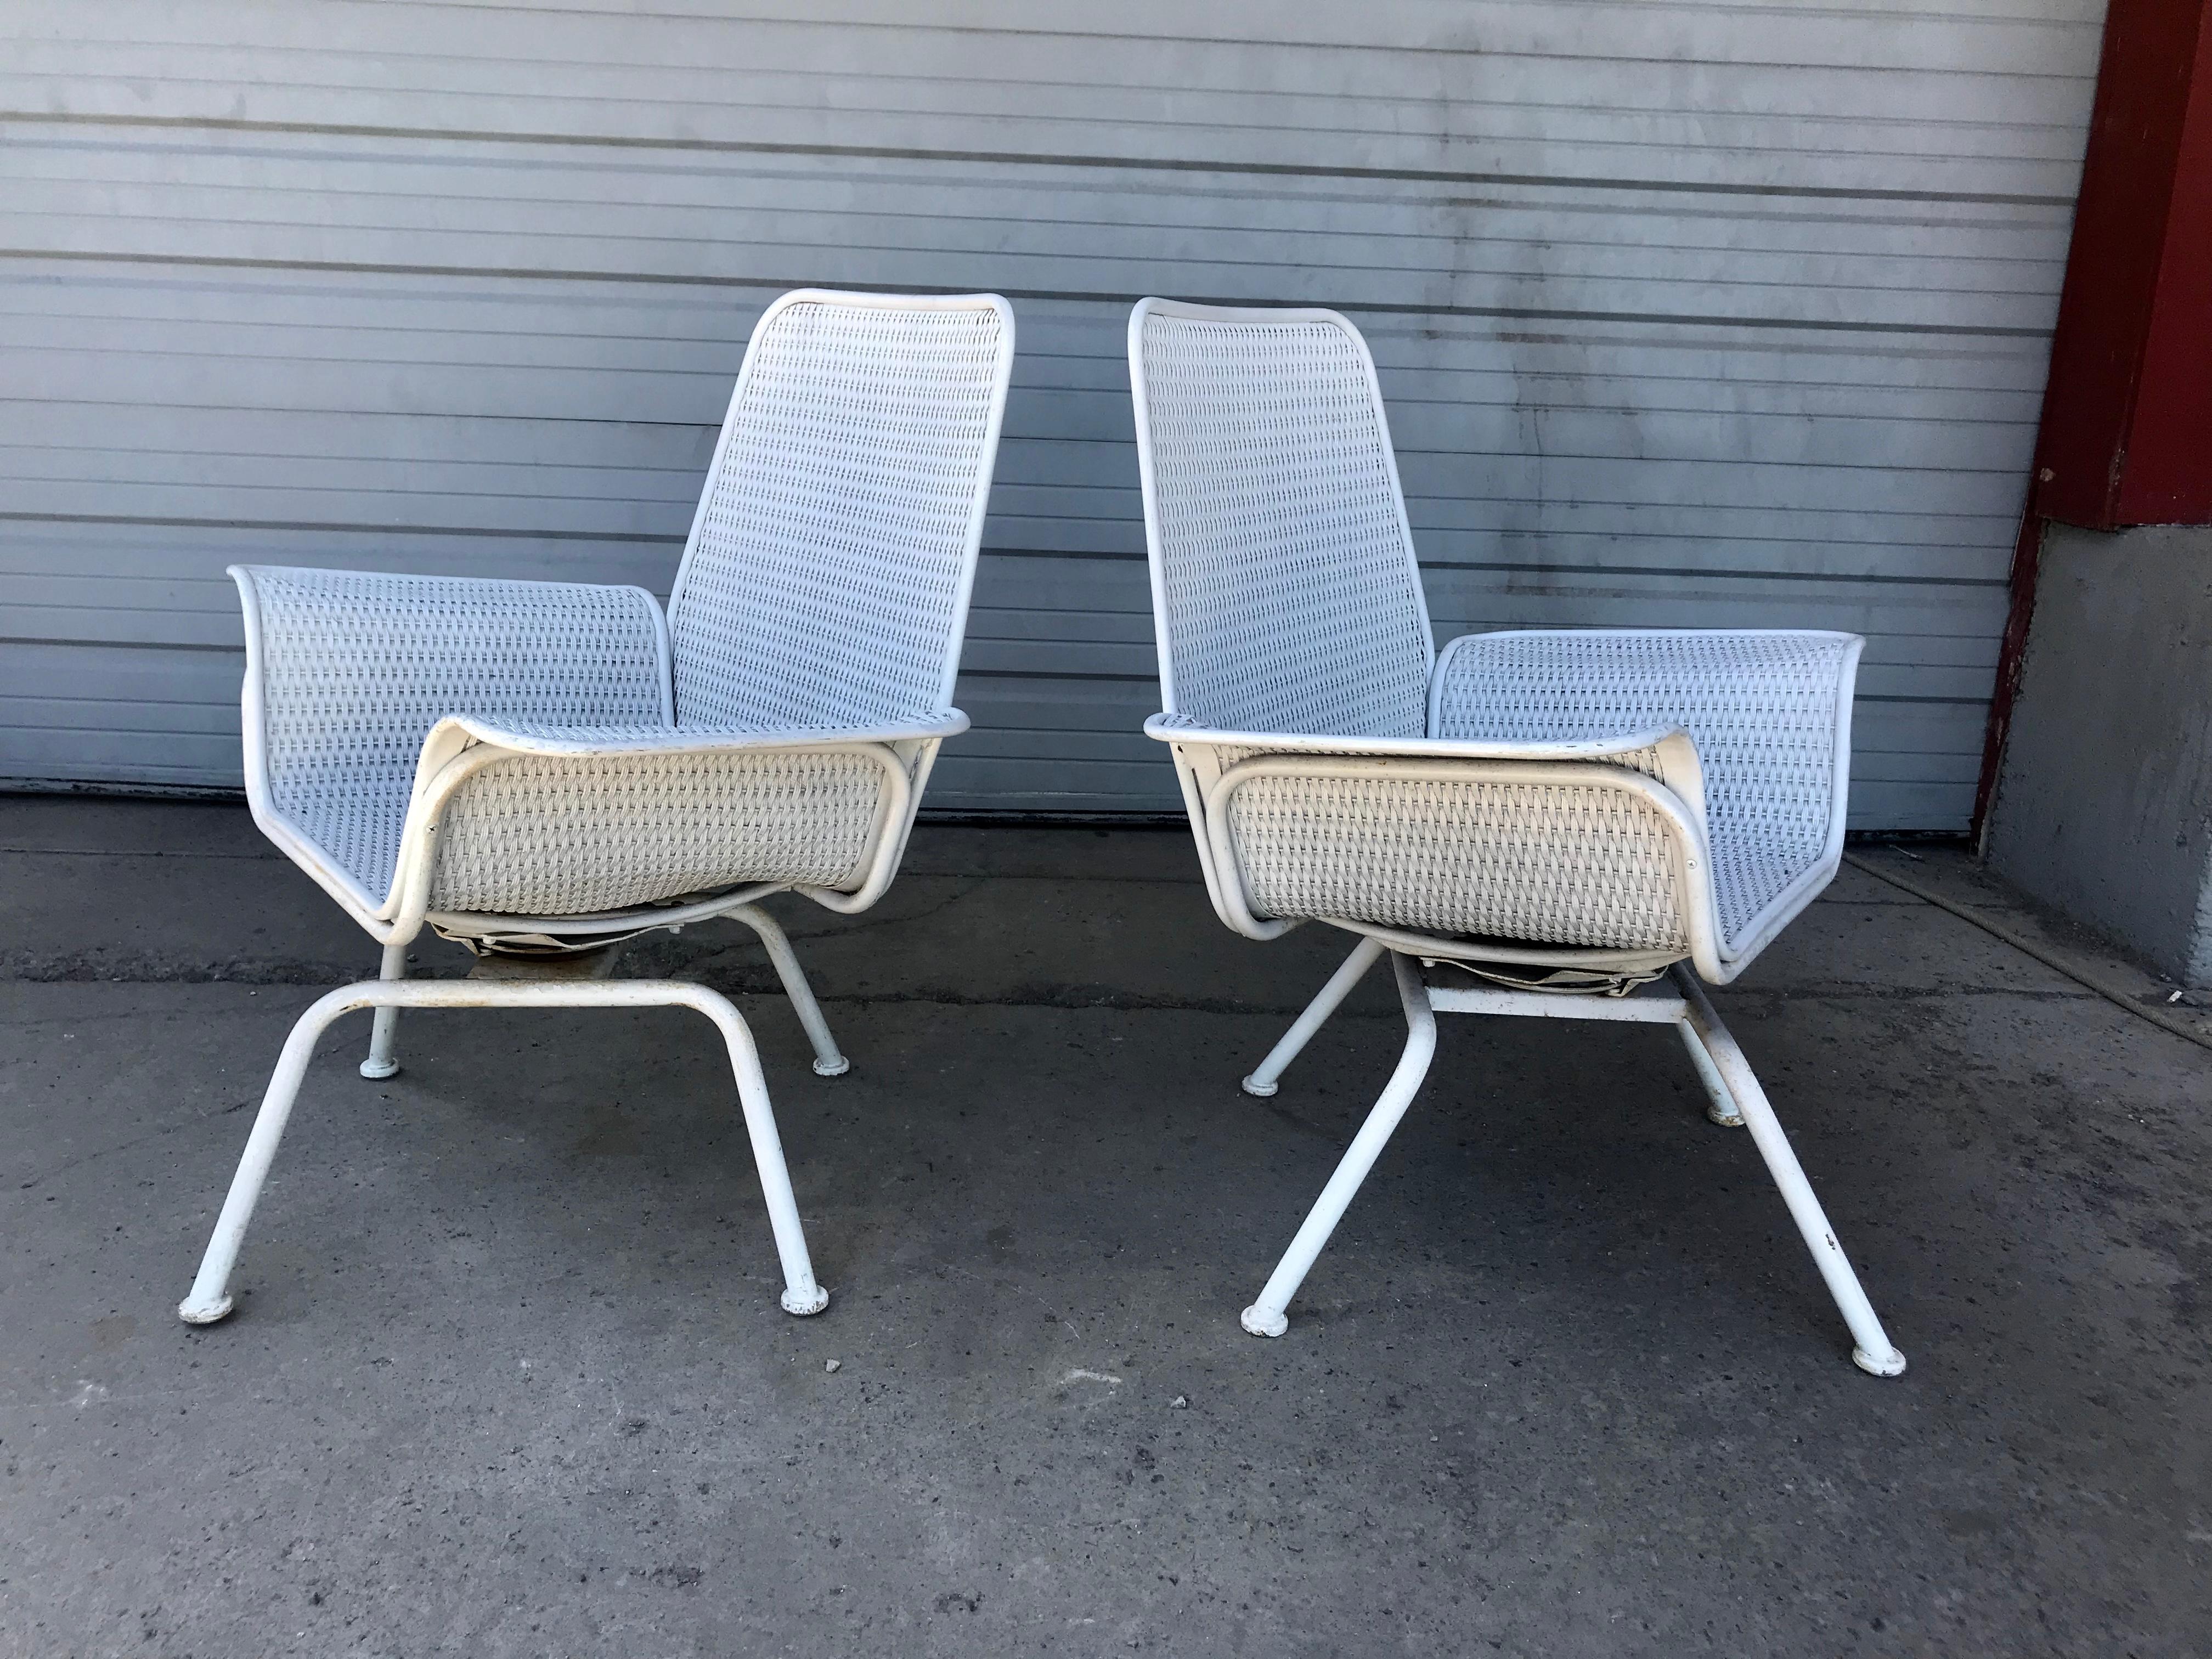 Mid-20th Century Pair of Mid-Century Modern Wicker and Metal Outdoor Lounge Chairs, Woodard